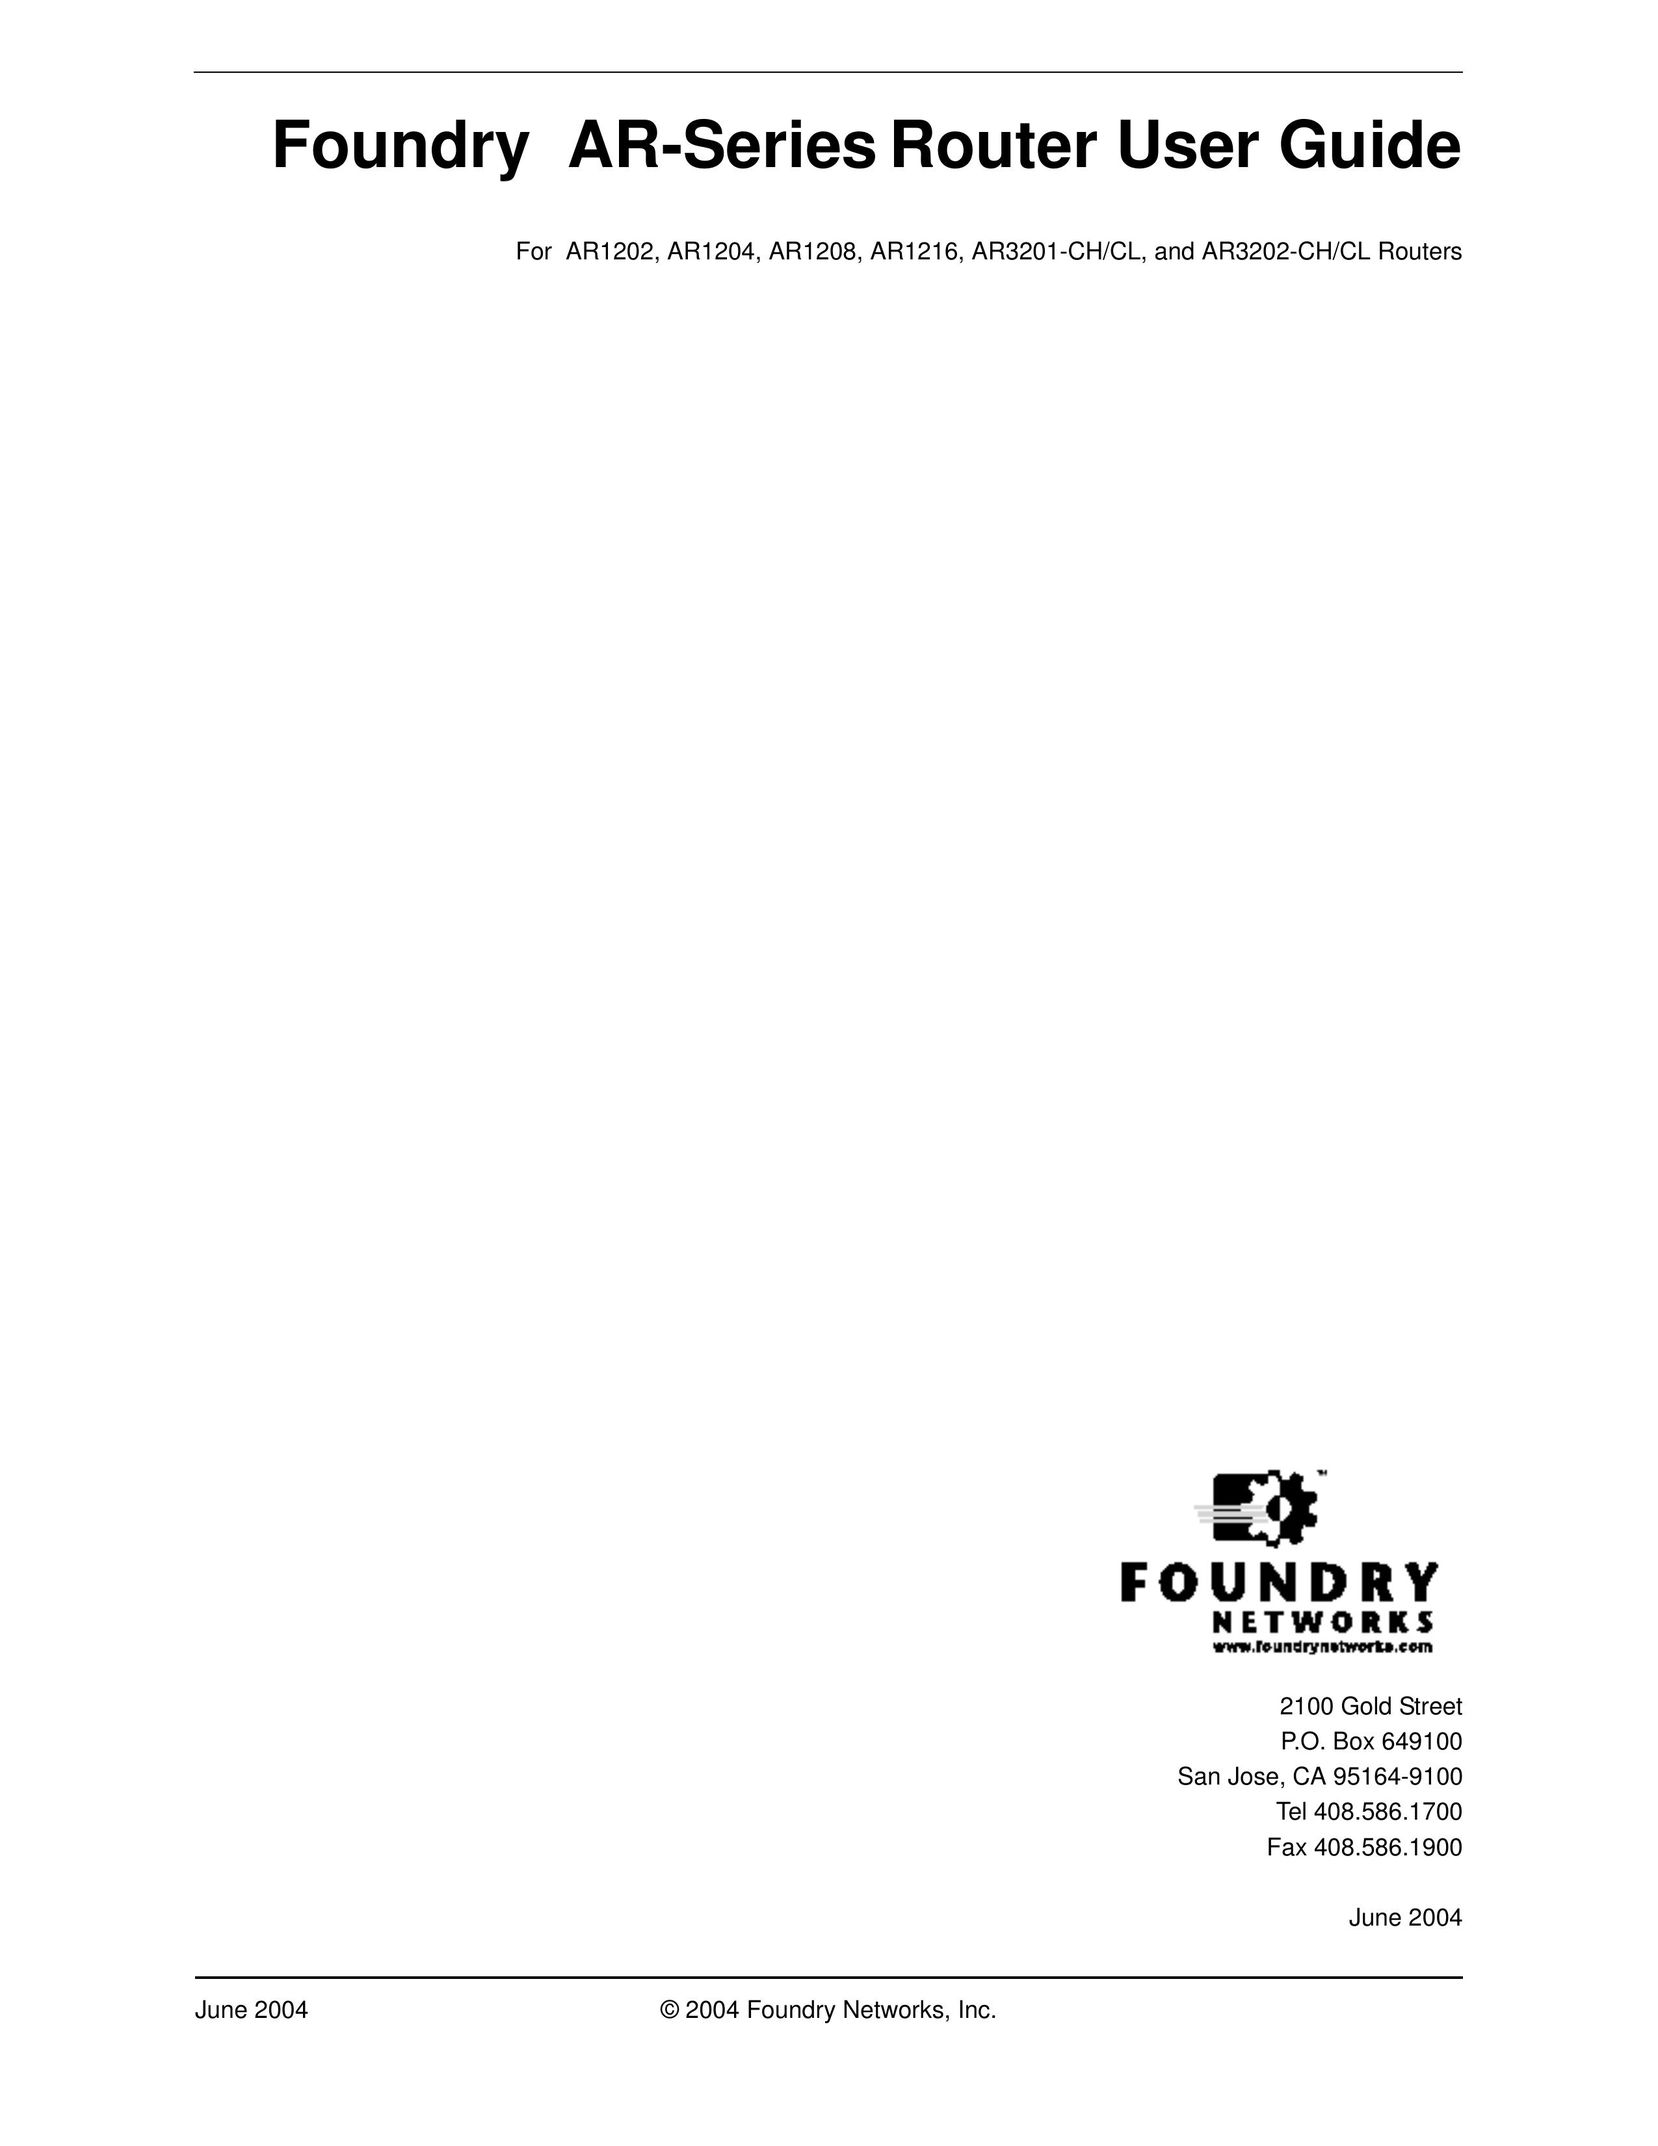 Foundry Networks AR3201 Network Router User Manual